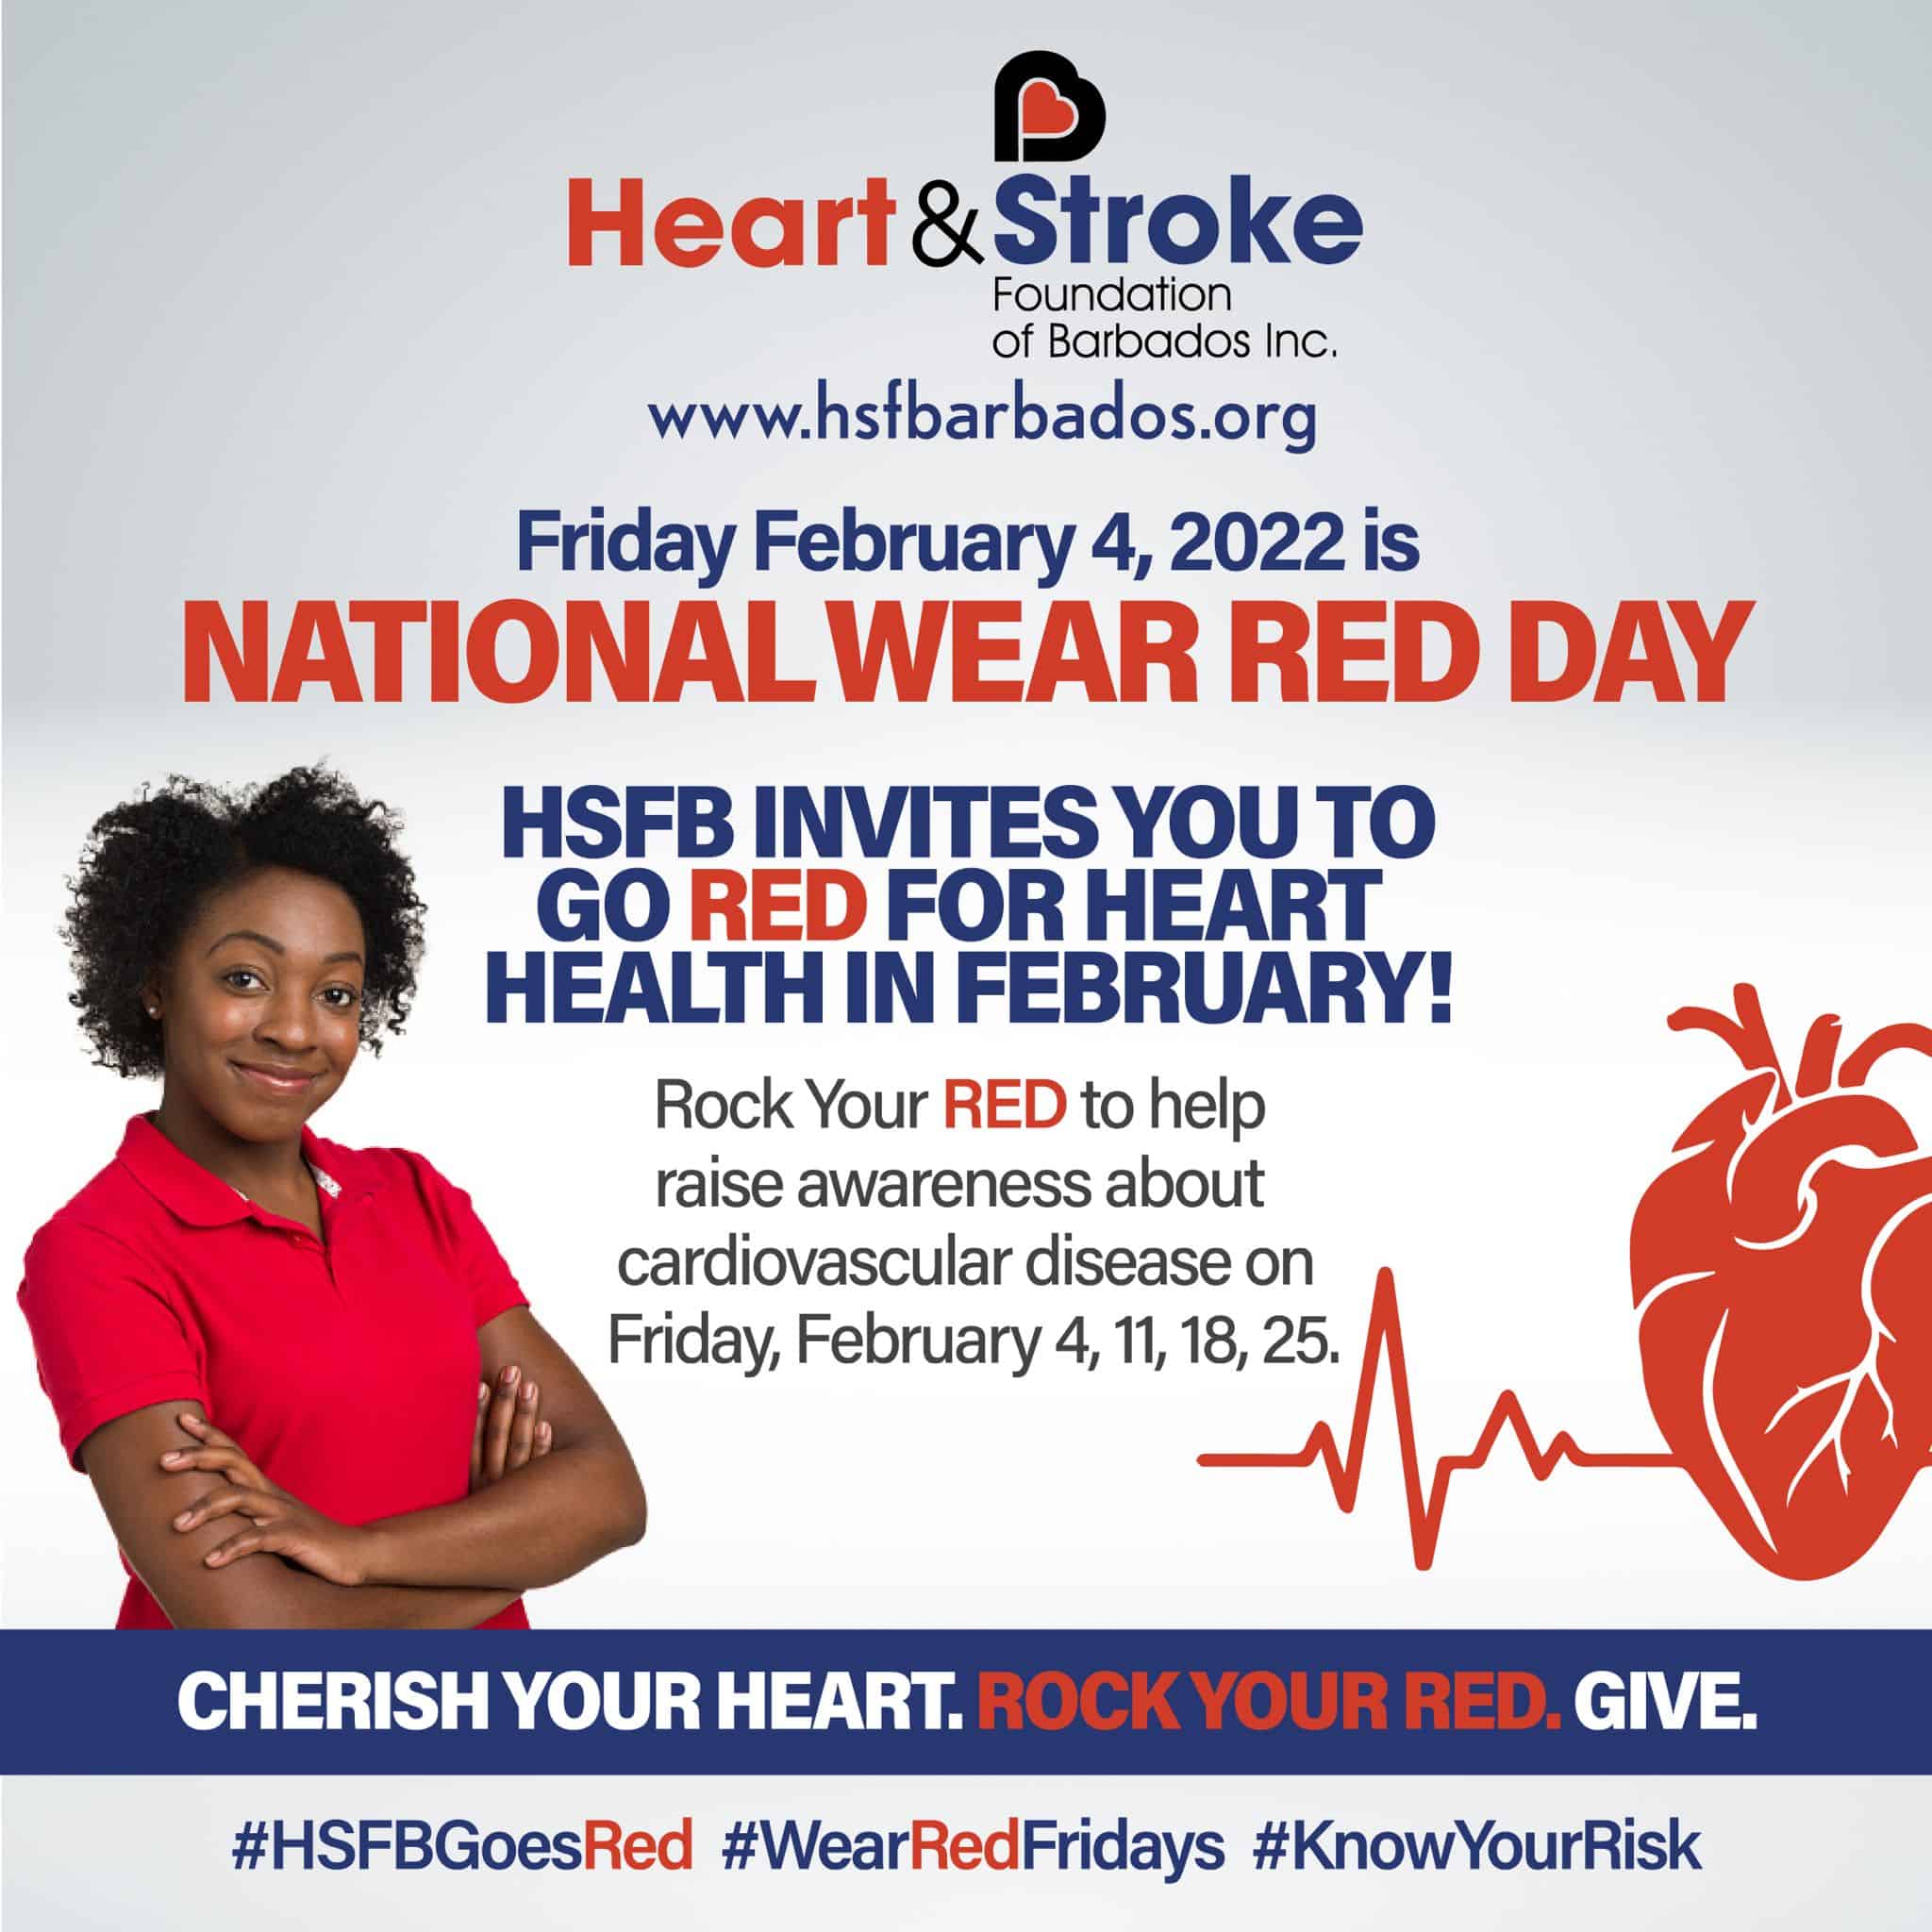 Wear Red for Heart Health in February!